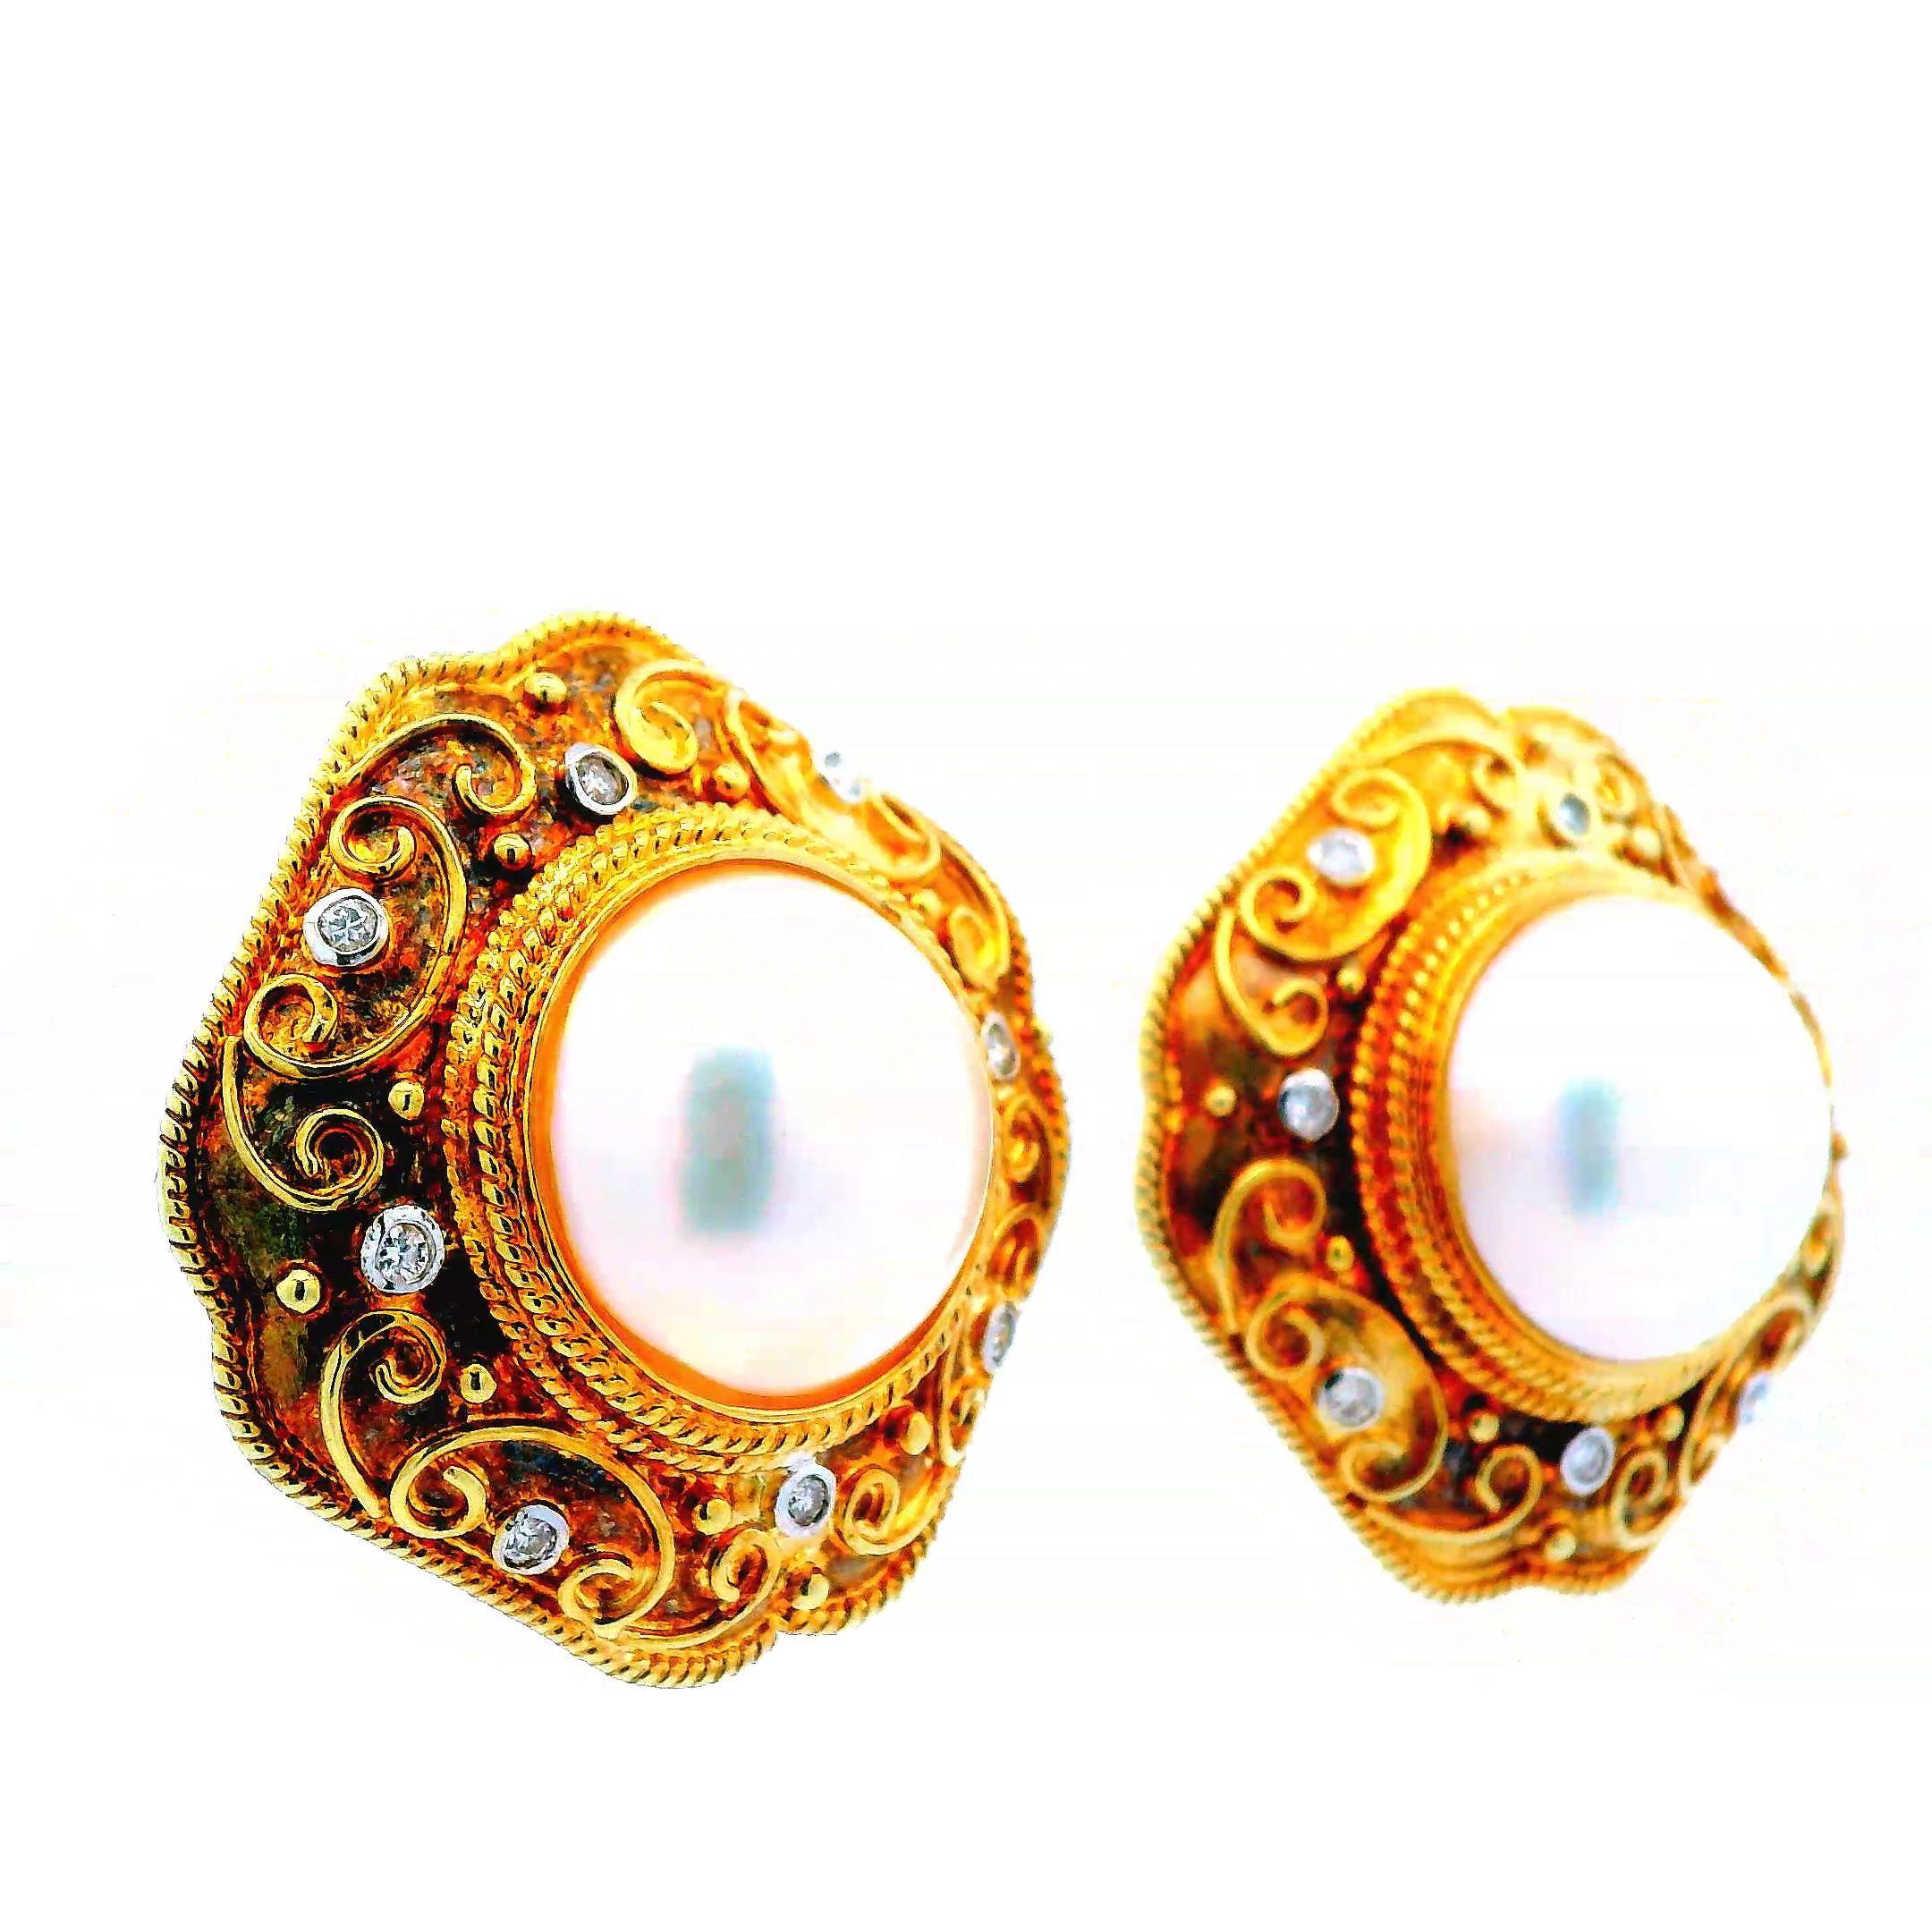 This elegant pair of earrings are made in 14k yellow gold with diamonds and mabe pearls. Mabe pearls are half-pearls grown on the inside of the shell of oysters, creating a unique dome shape. The center of these earrings contain 14.5mm mabe pearls